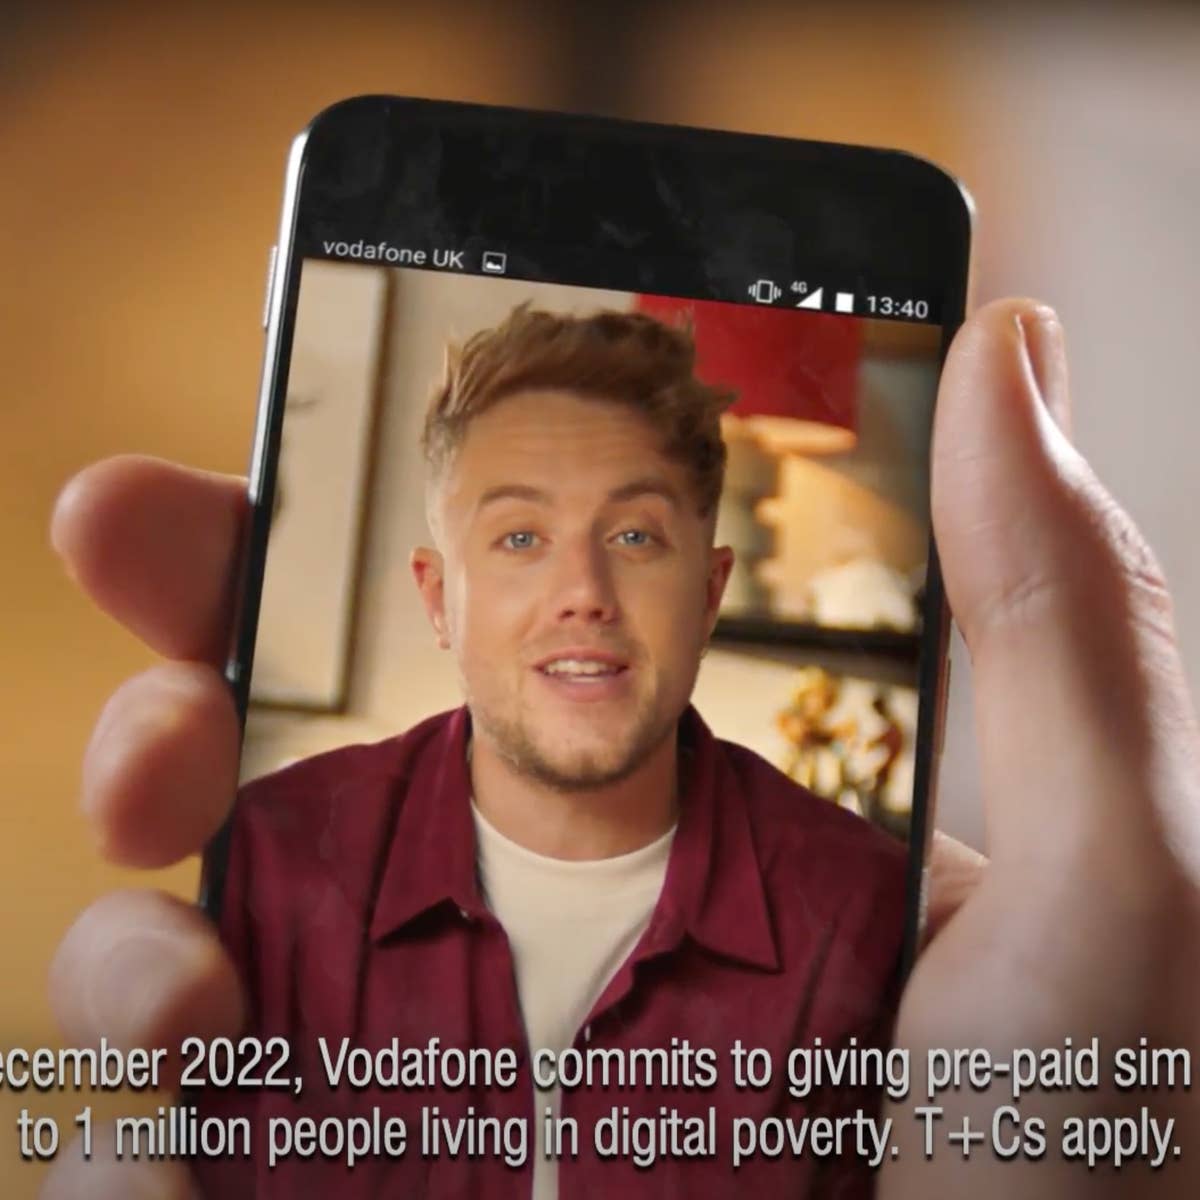 How Carat helped Vodafone unpack Reboxing Day